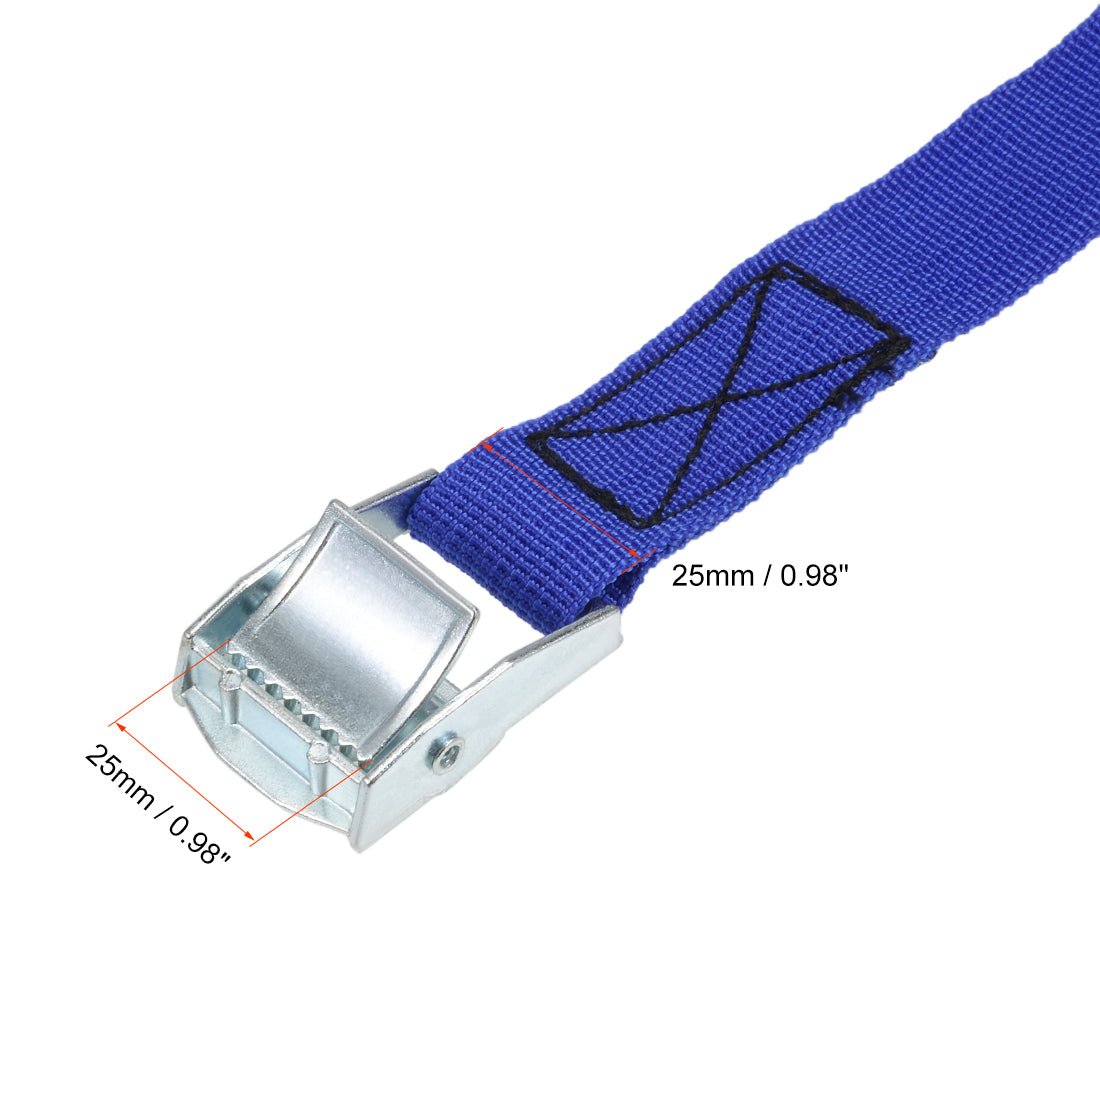 uxcell Uxcell 4M x 25mm Lashing Strap Cargo Tie Down Straps w Cam Lock Buckle 250Kg Work Load, Blue, 2Pcs